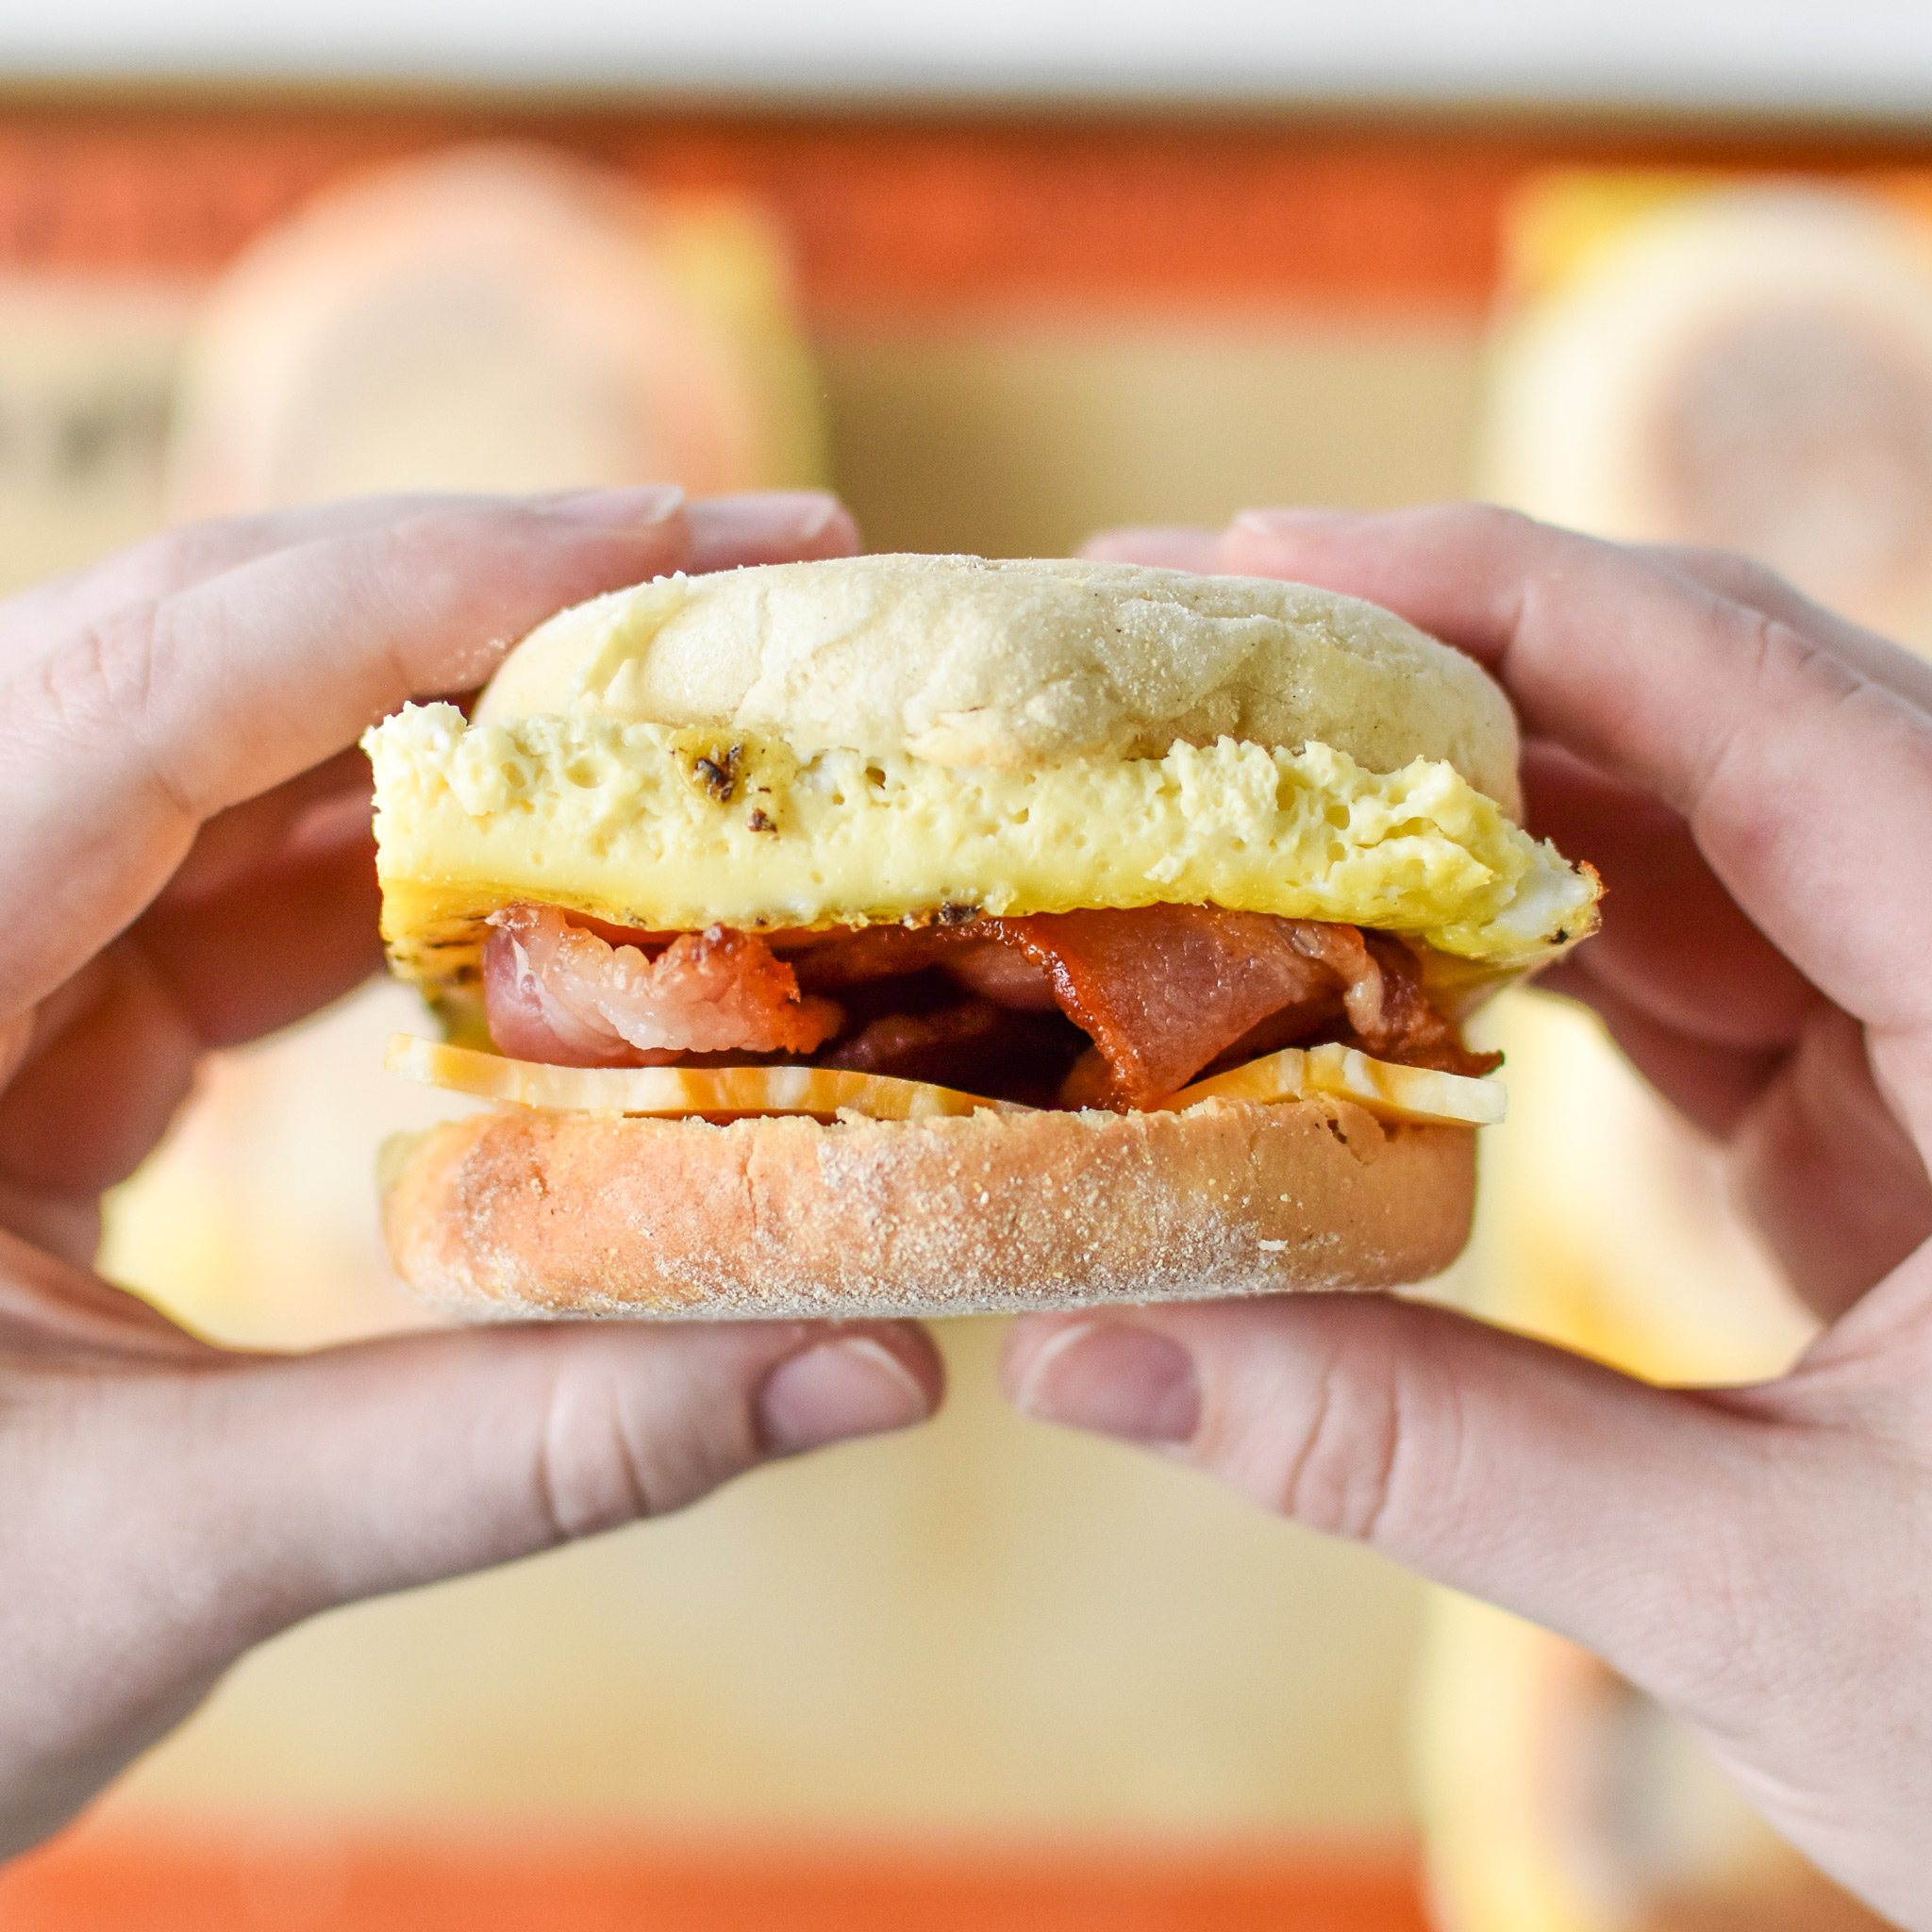 So ready to take a bite of this Make-Ahead Bacon Breakfast Sandwich!